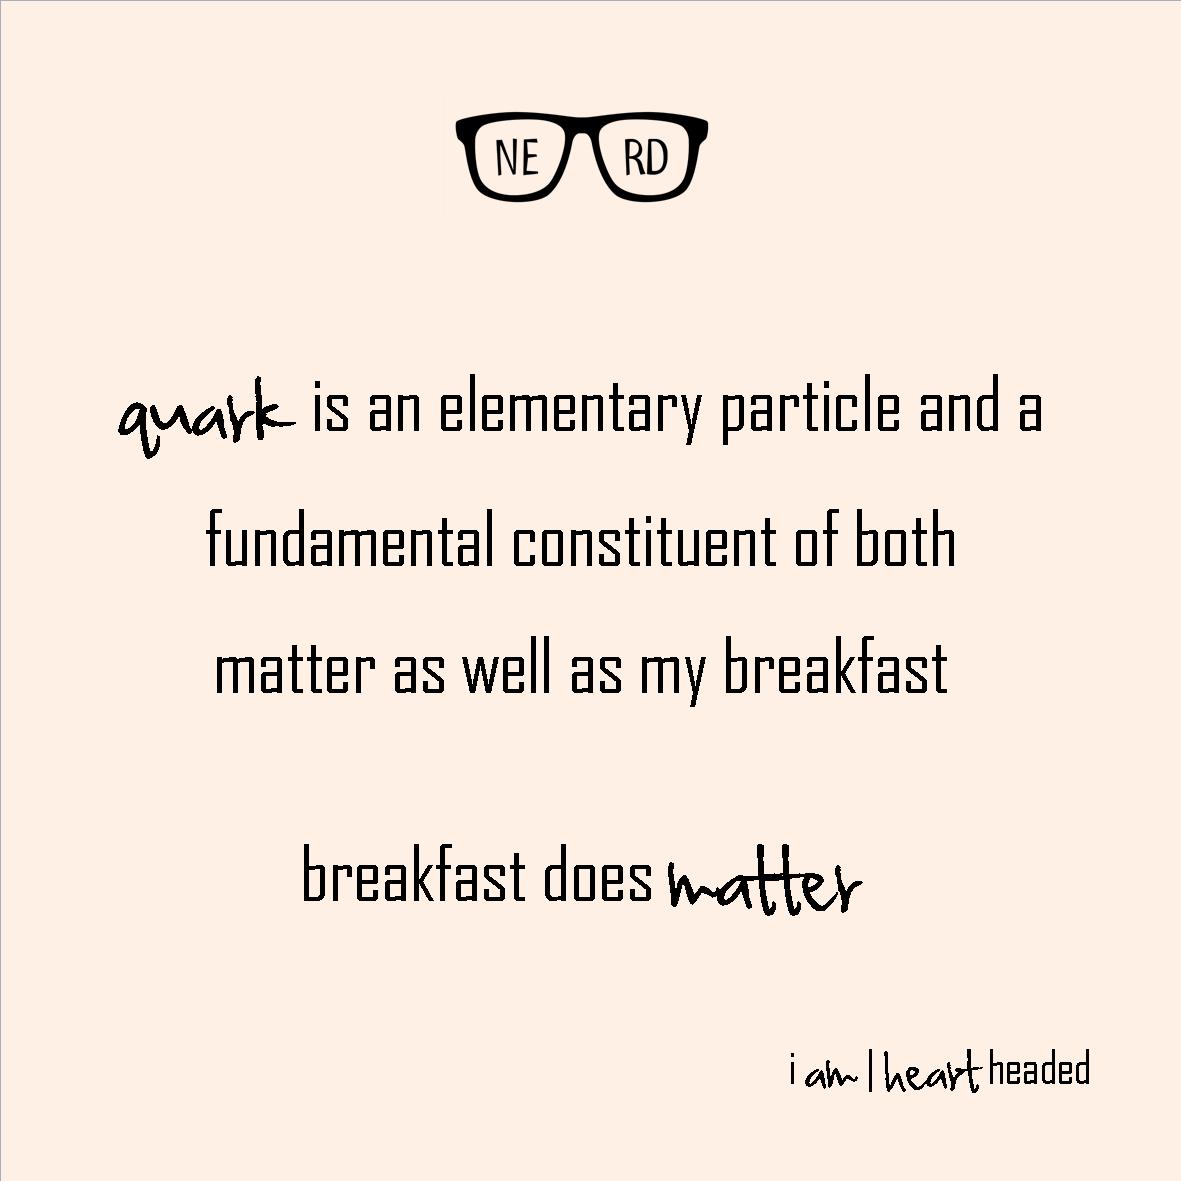 full-size featured image of quote 'breakfast does matter' in category 'nerdy' at i am | heart headed